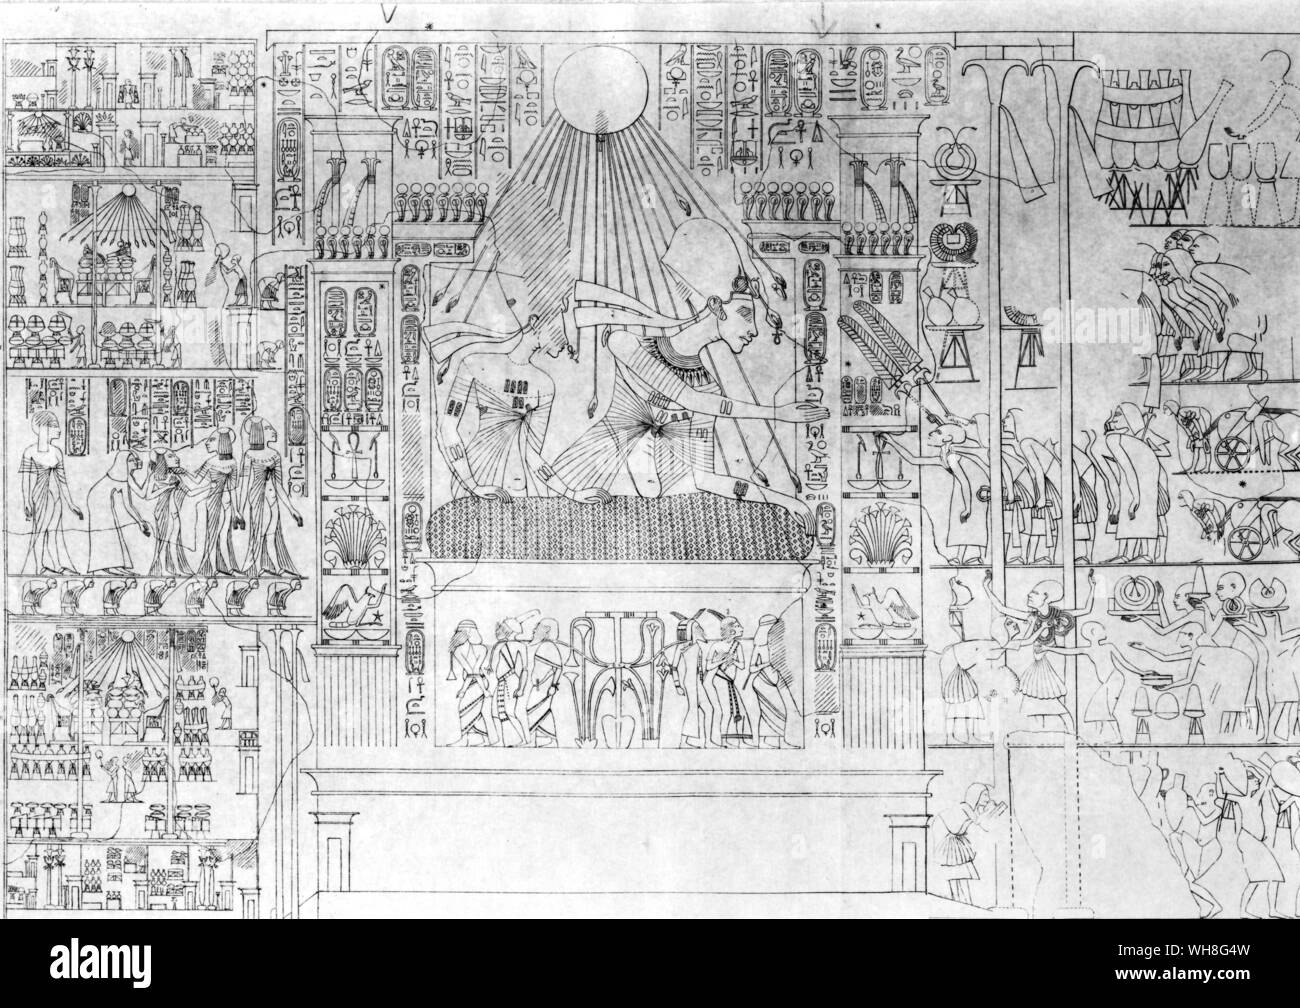 Akhenaten and Nefertiti at the Great State Window of their palace. On the left are the royal princesses and a plan of the palace (Tomb of Pernefer). Nefertiti was the wife of the Egyptian Pharaoh Amenhotep IV (later Akhenaten), and mother-in-law of the Pharaoh Tutankhamen. Tutankhamen by Christiane Desroches Noblecourt, page 144. Stock Photo